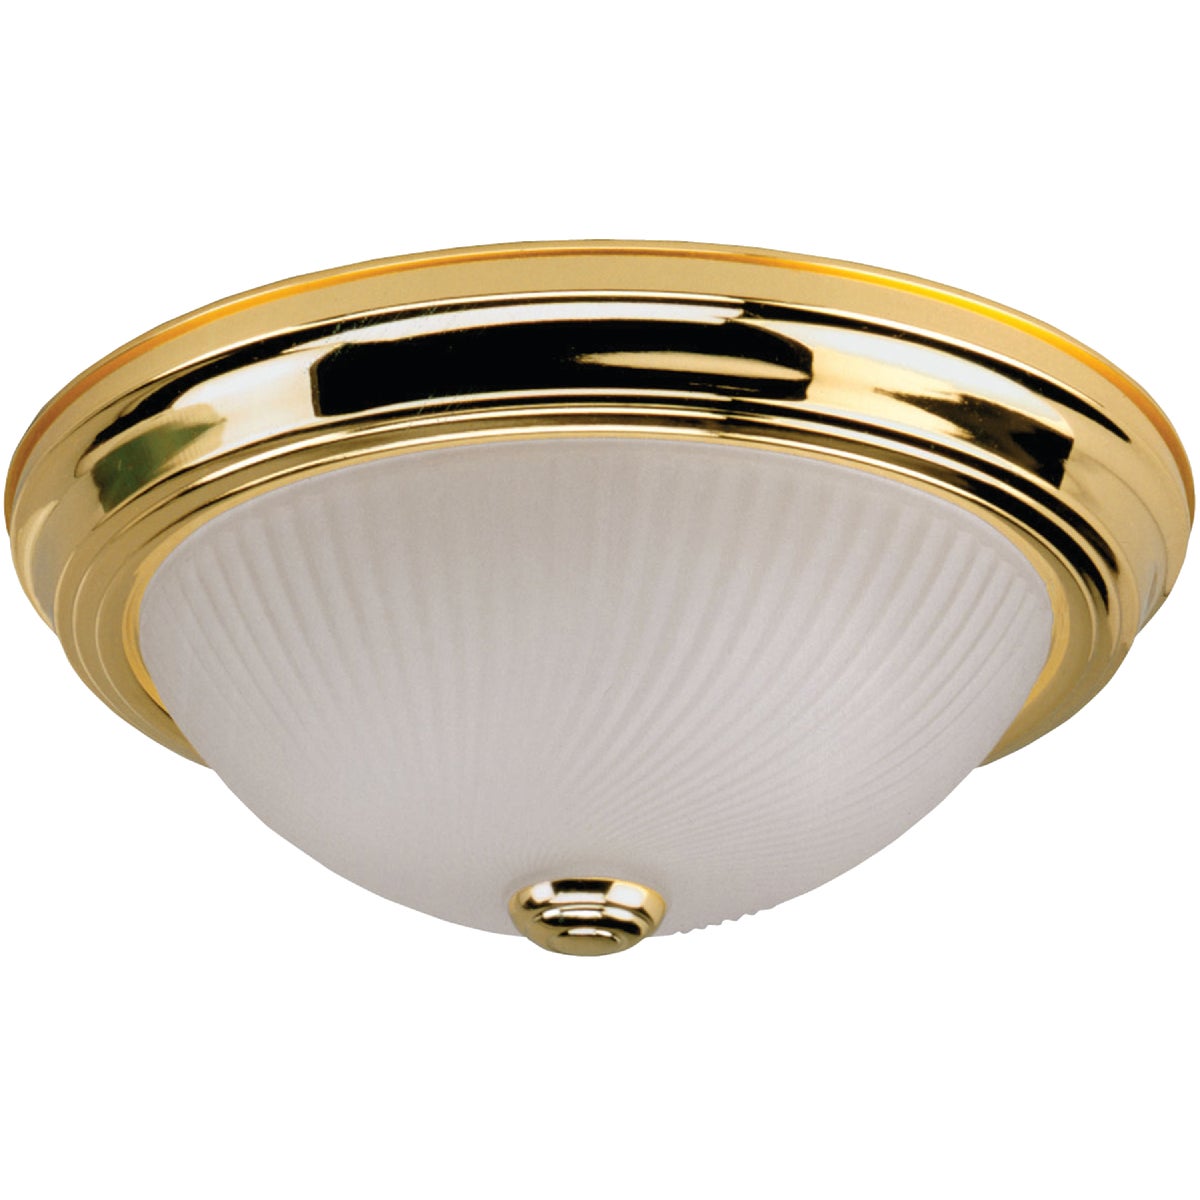 Home Impressions 11 In. Polished Brass Incandescent Flush Mount Ceiling Light Fixture